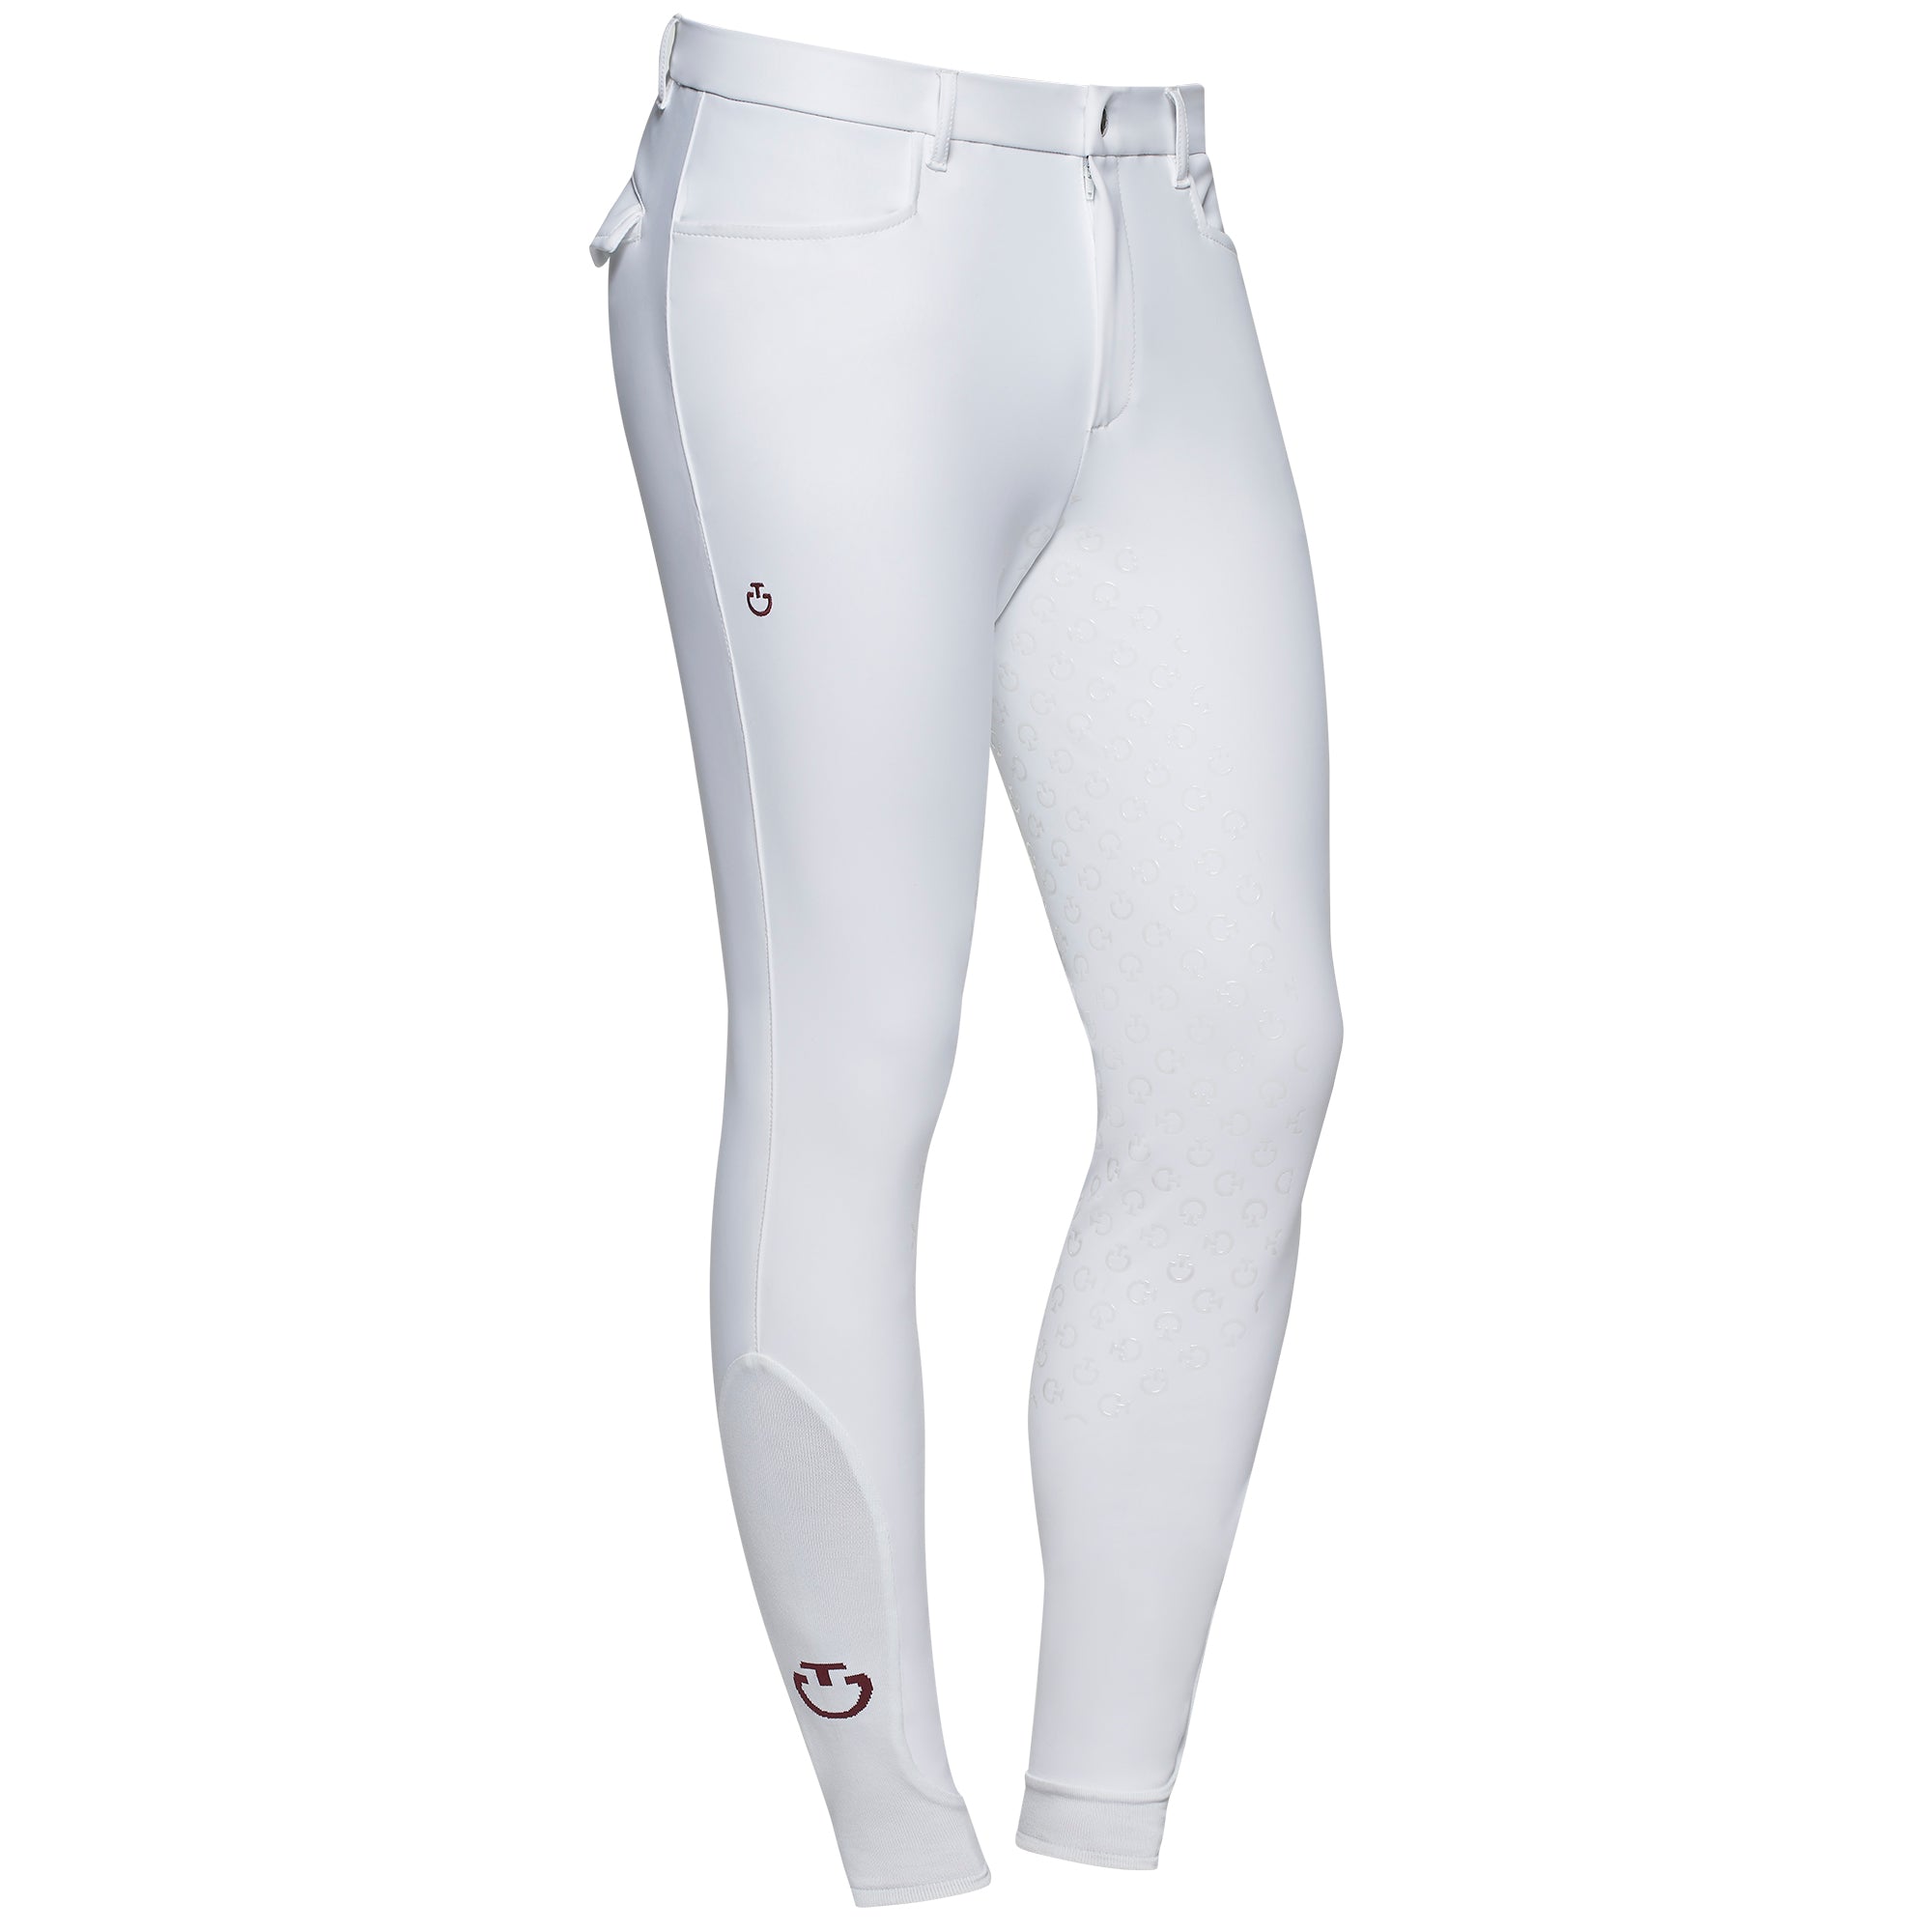 Men's competition breeches full grip